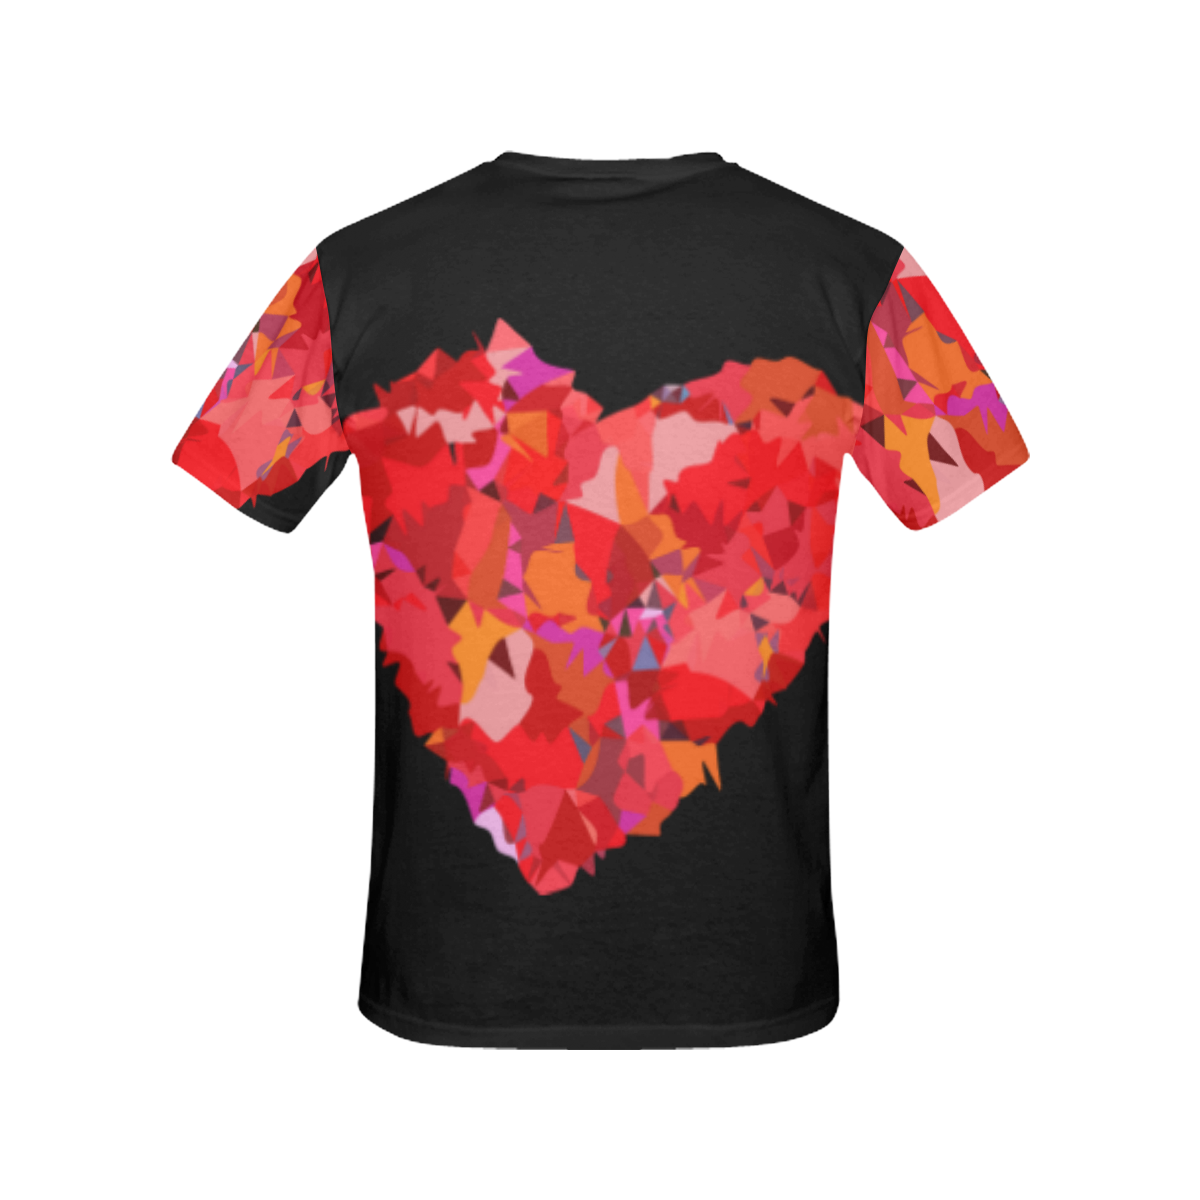 Red Love Heart Geometric Triangles All Over Print T-Shirt for Women ...